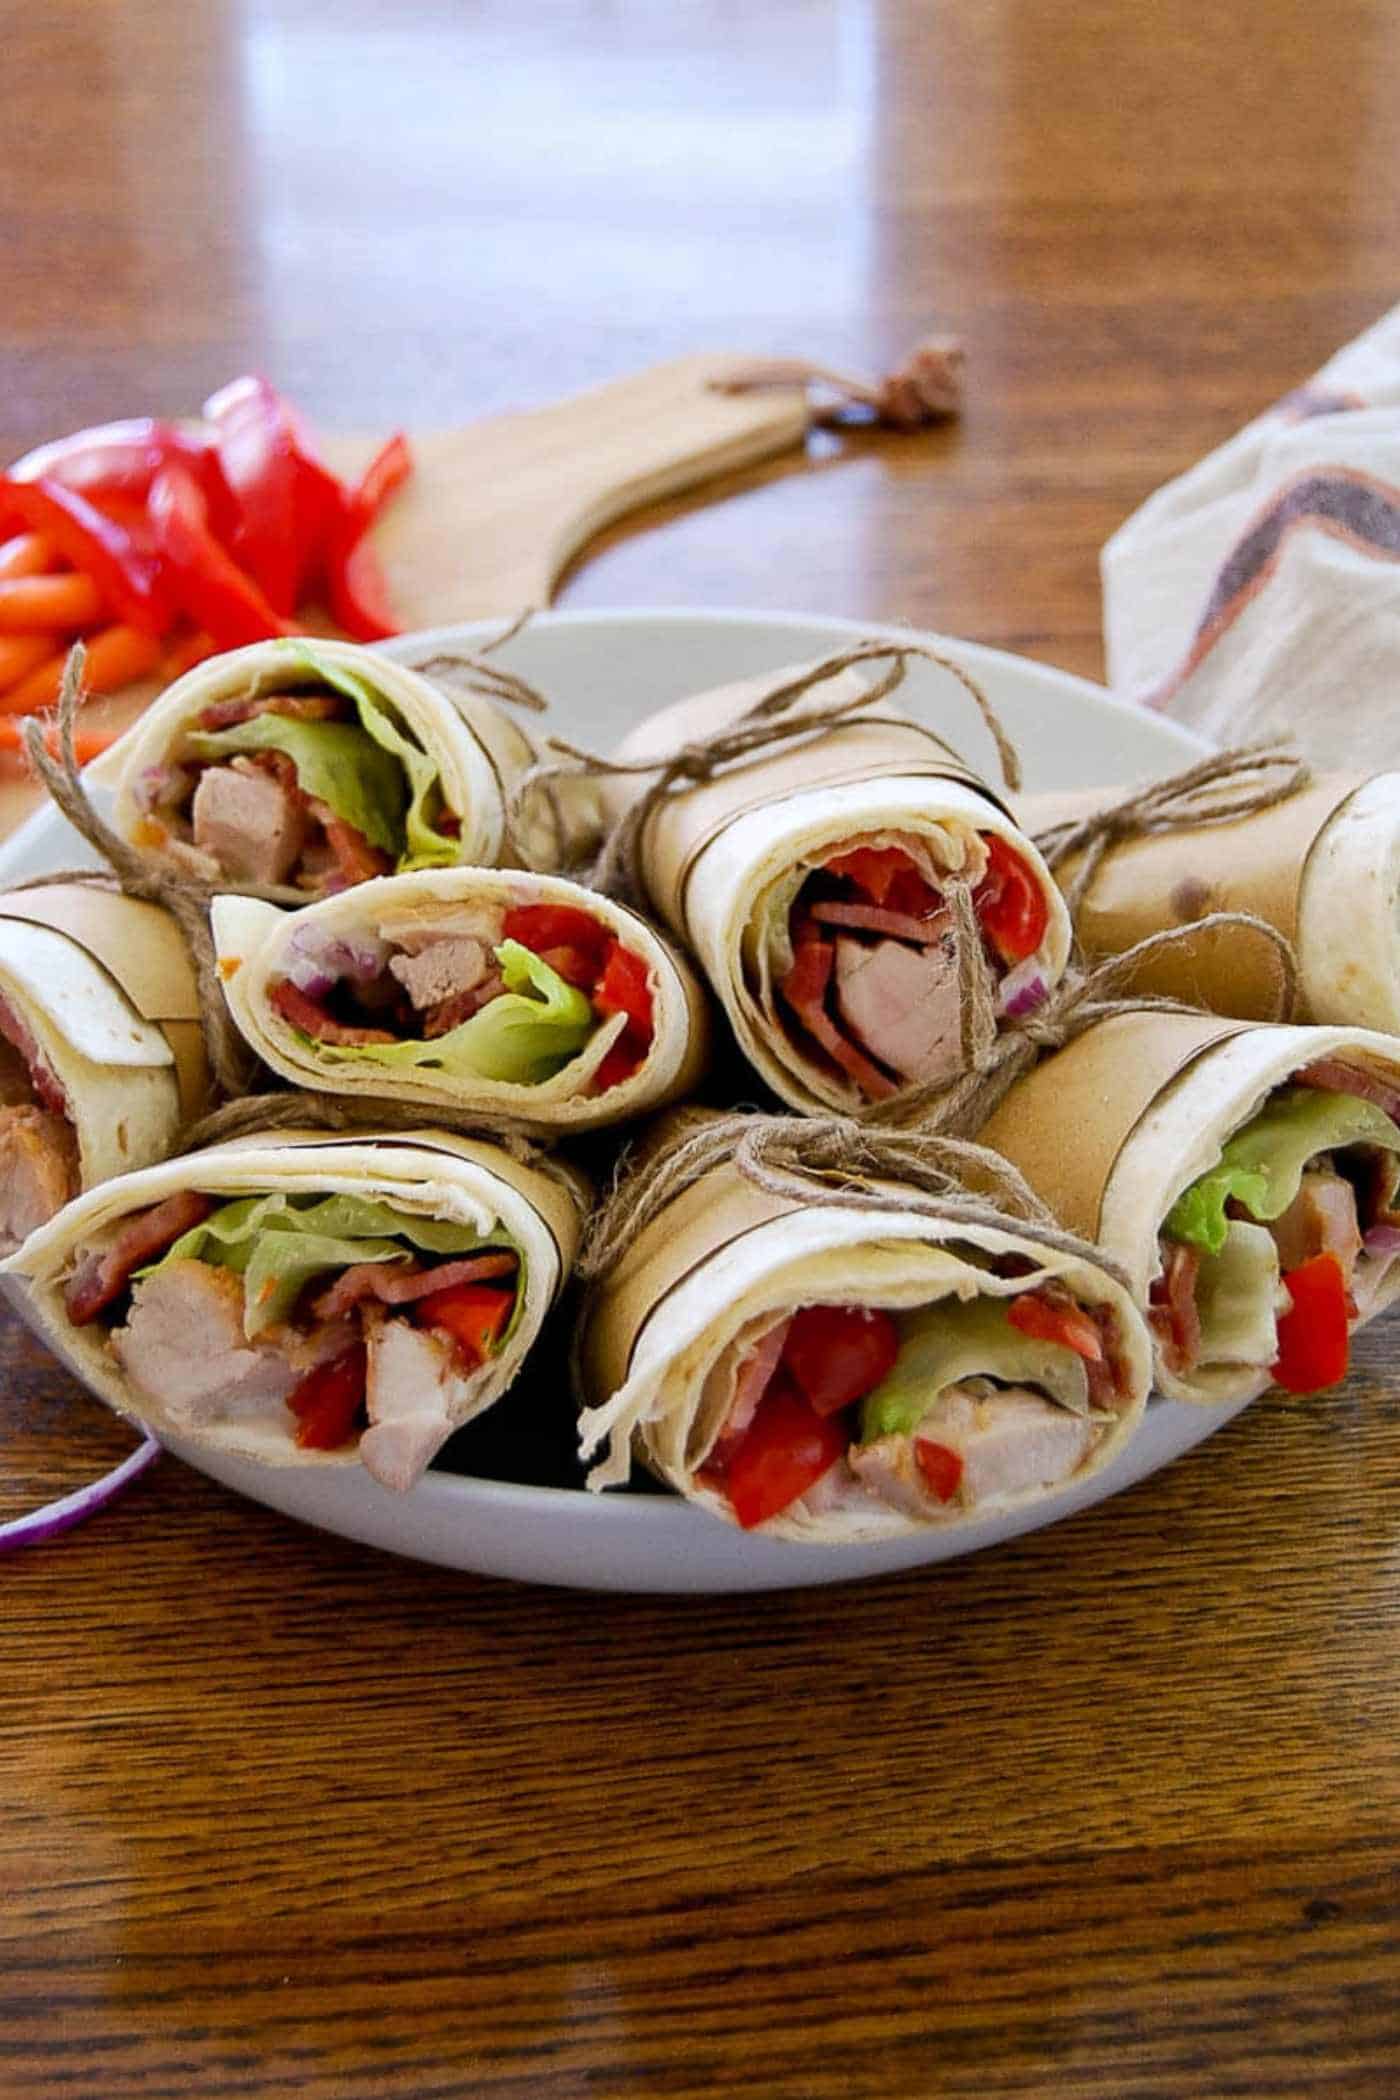 chicken bacon ranch wraps on plate with diced vegetables in background.